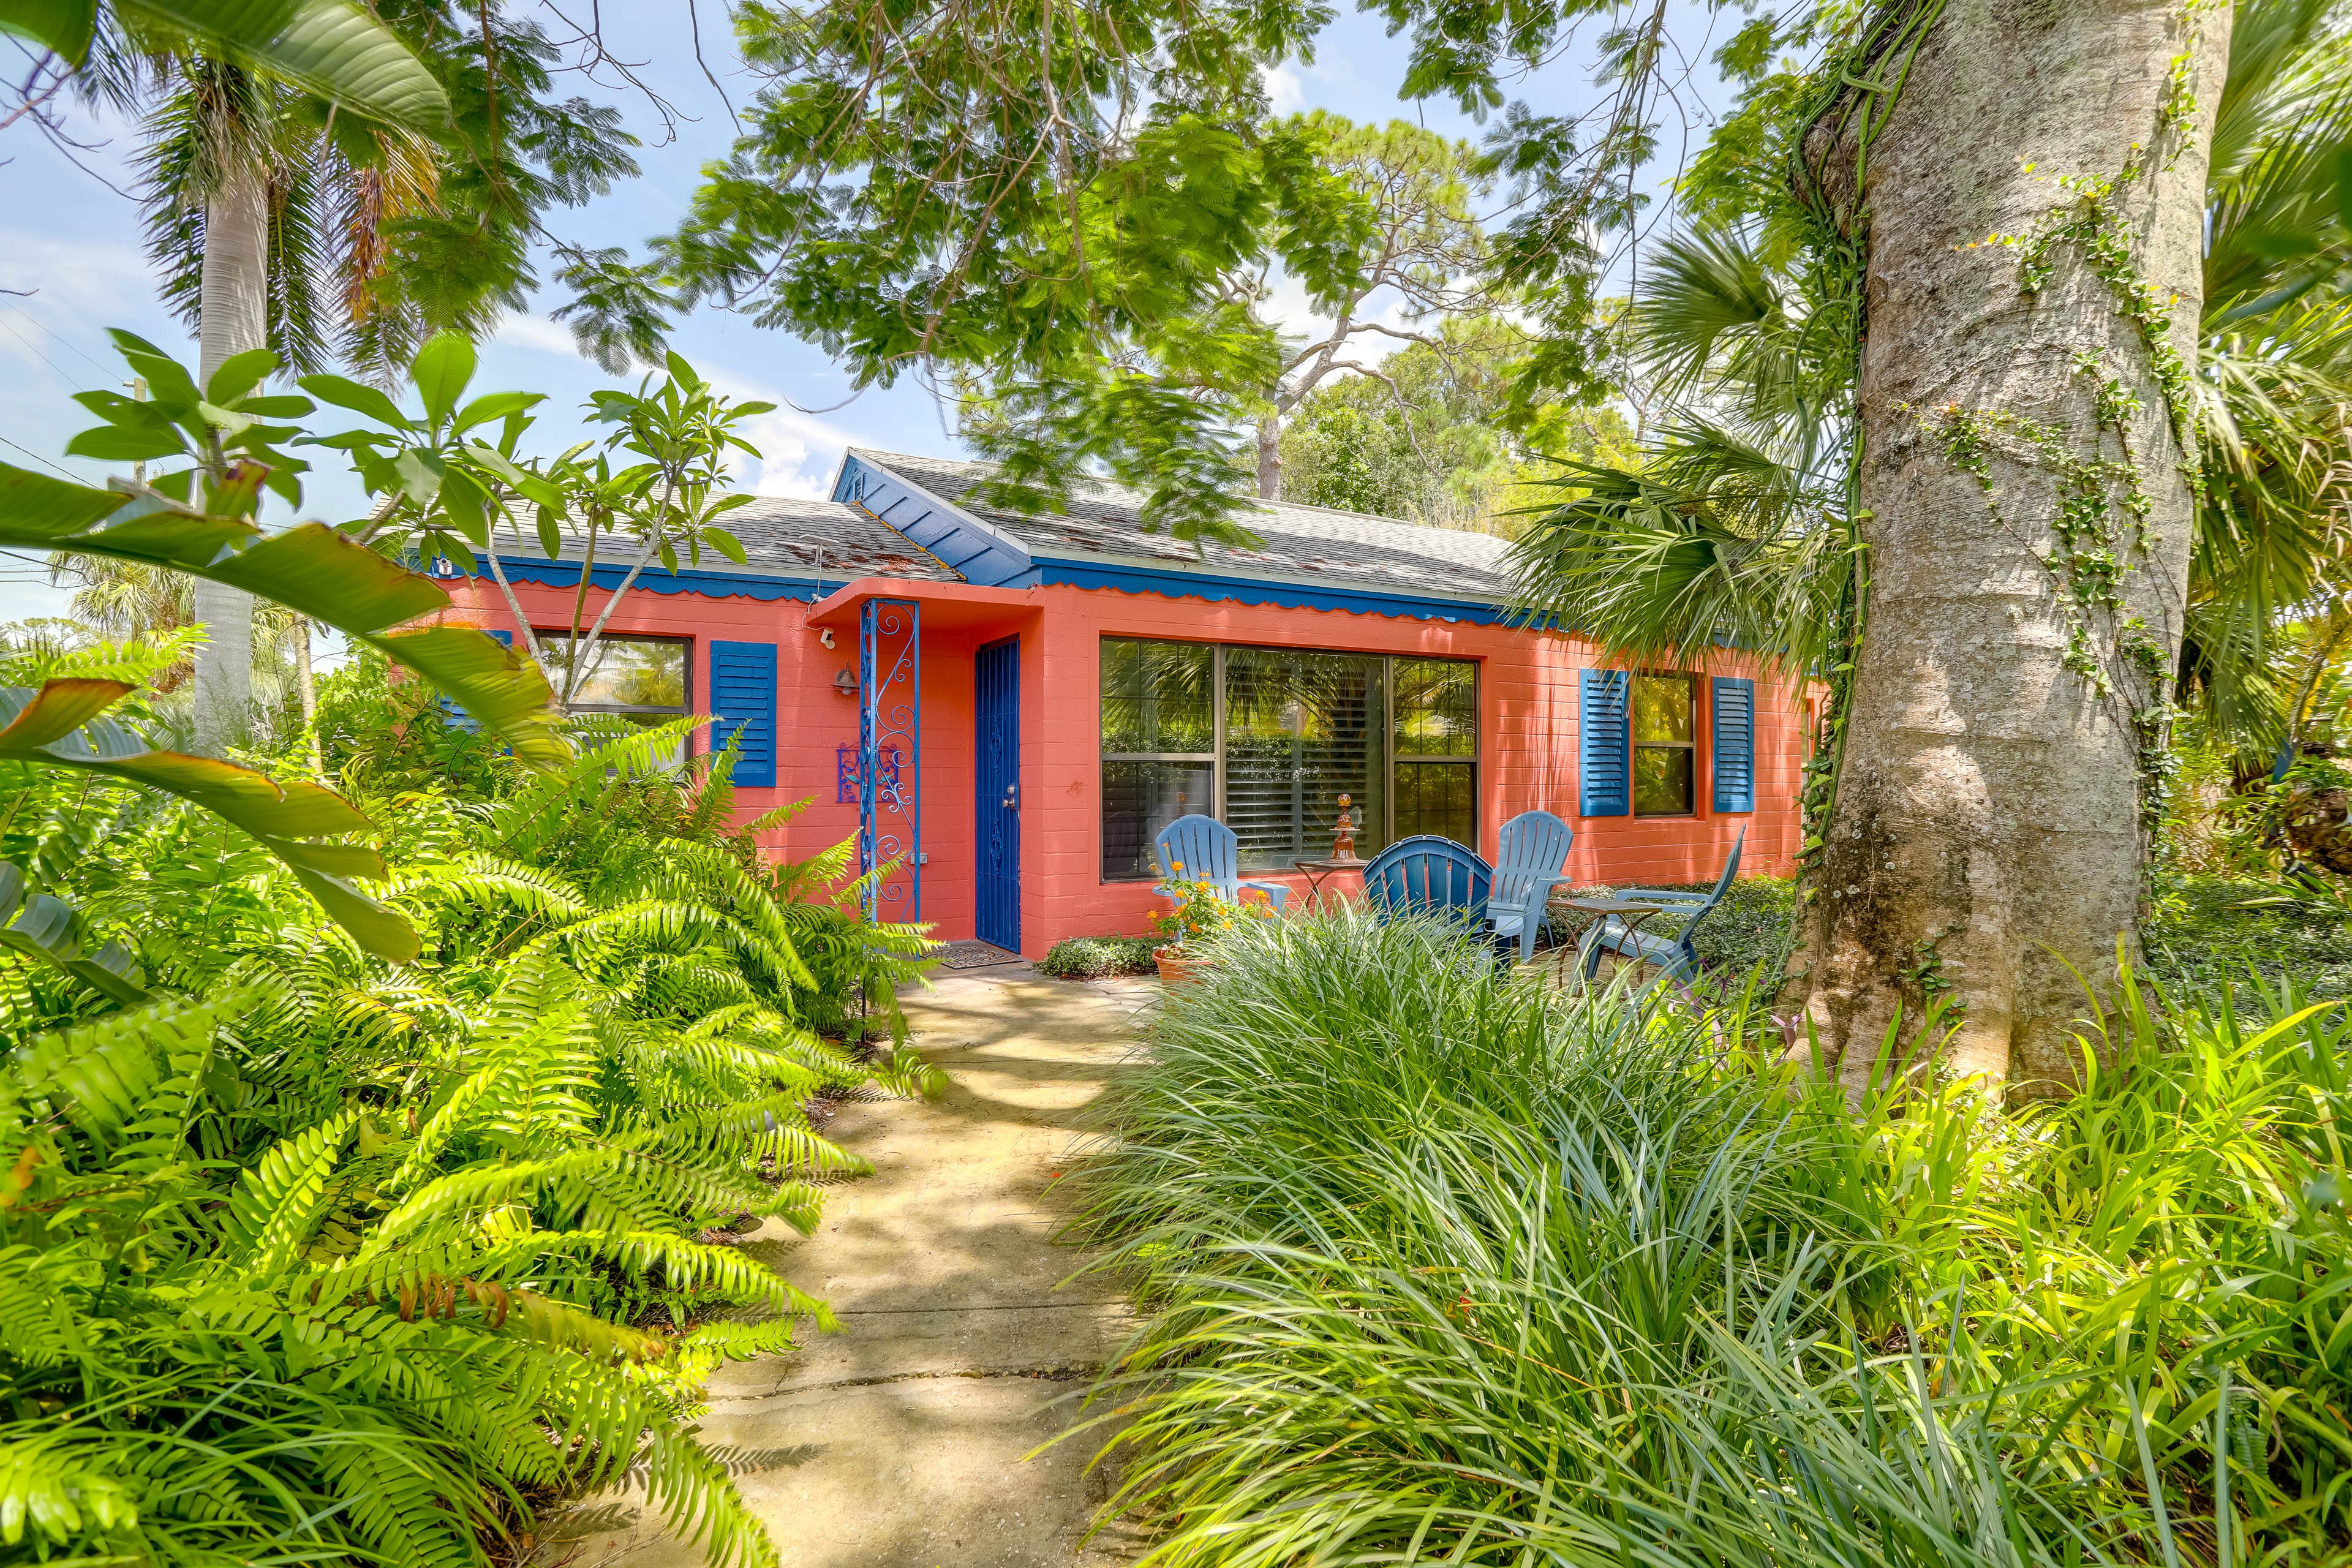 Property Image 2 - Colorful Gulfport Home: Walk to the Art District!